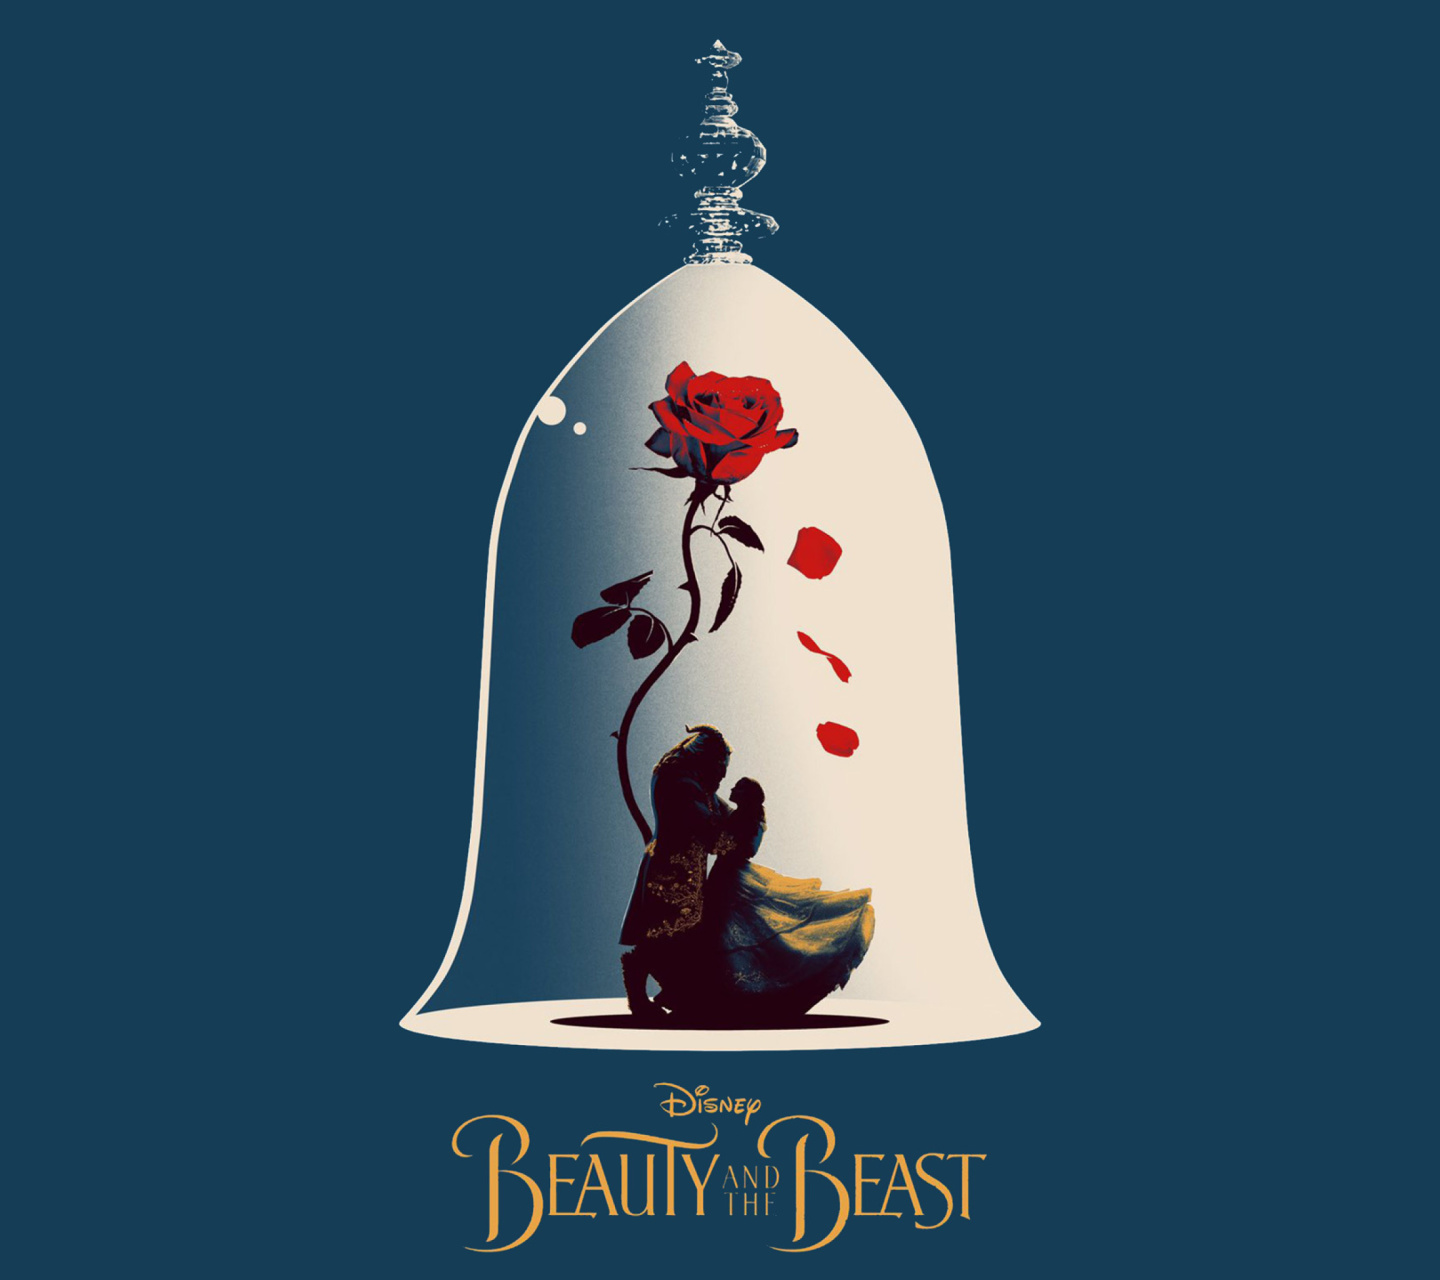 Beauty and the Beast Poster screenshot #1 1440x1280